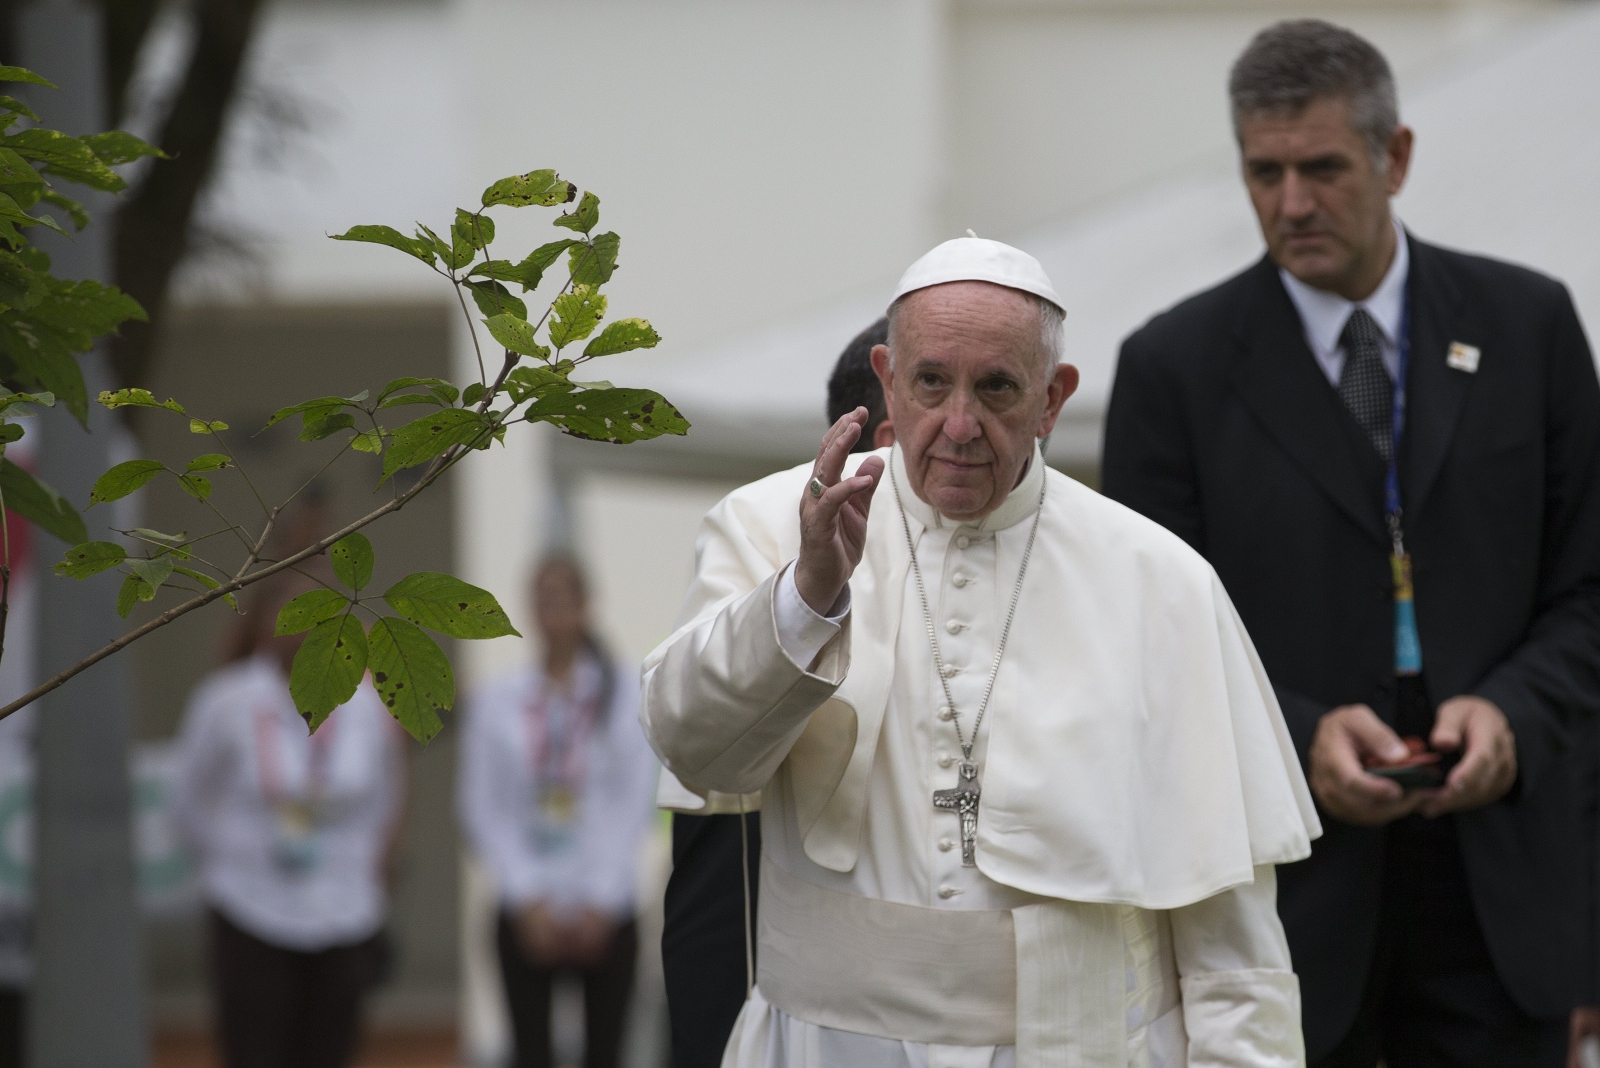 epa06193239 Pope Francis bless a tree during an event to promote the reconciliation at Los Fundadores park in Villavicencio, Meta, Colombia, 08 September 2017. The Pontiff is in Colombia on a five-day official visit.  EPA/Orlando Barria 
Dostawca: PAP/EPA.